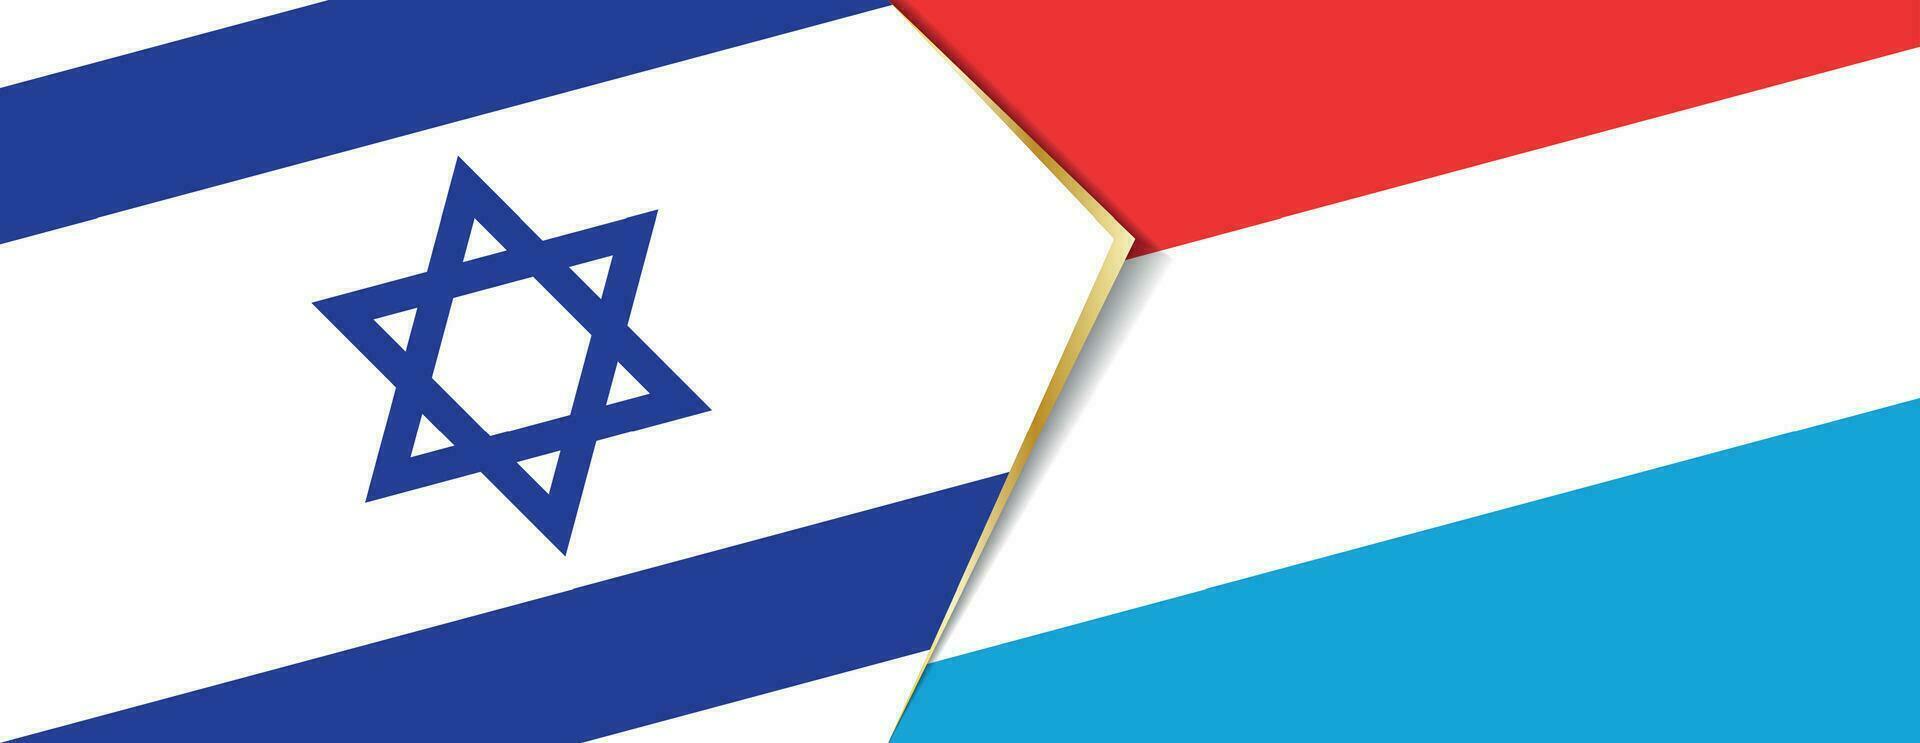 Israel and Luxembourg flags, two vector flags.